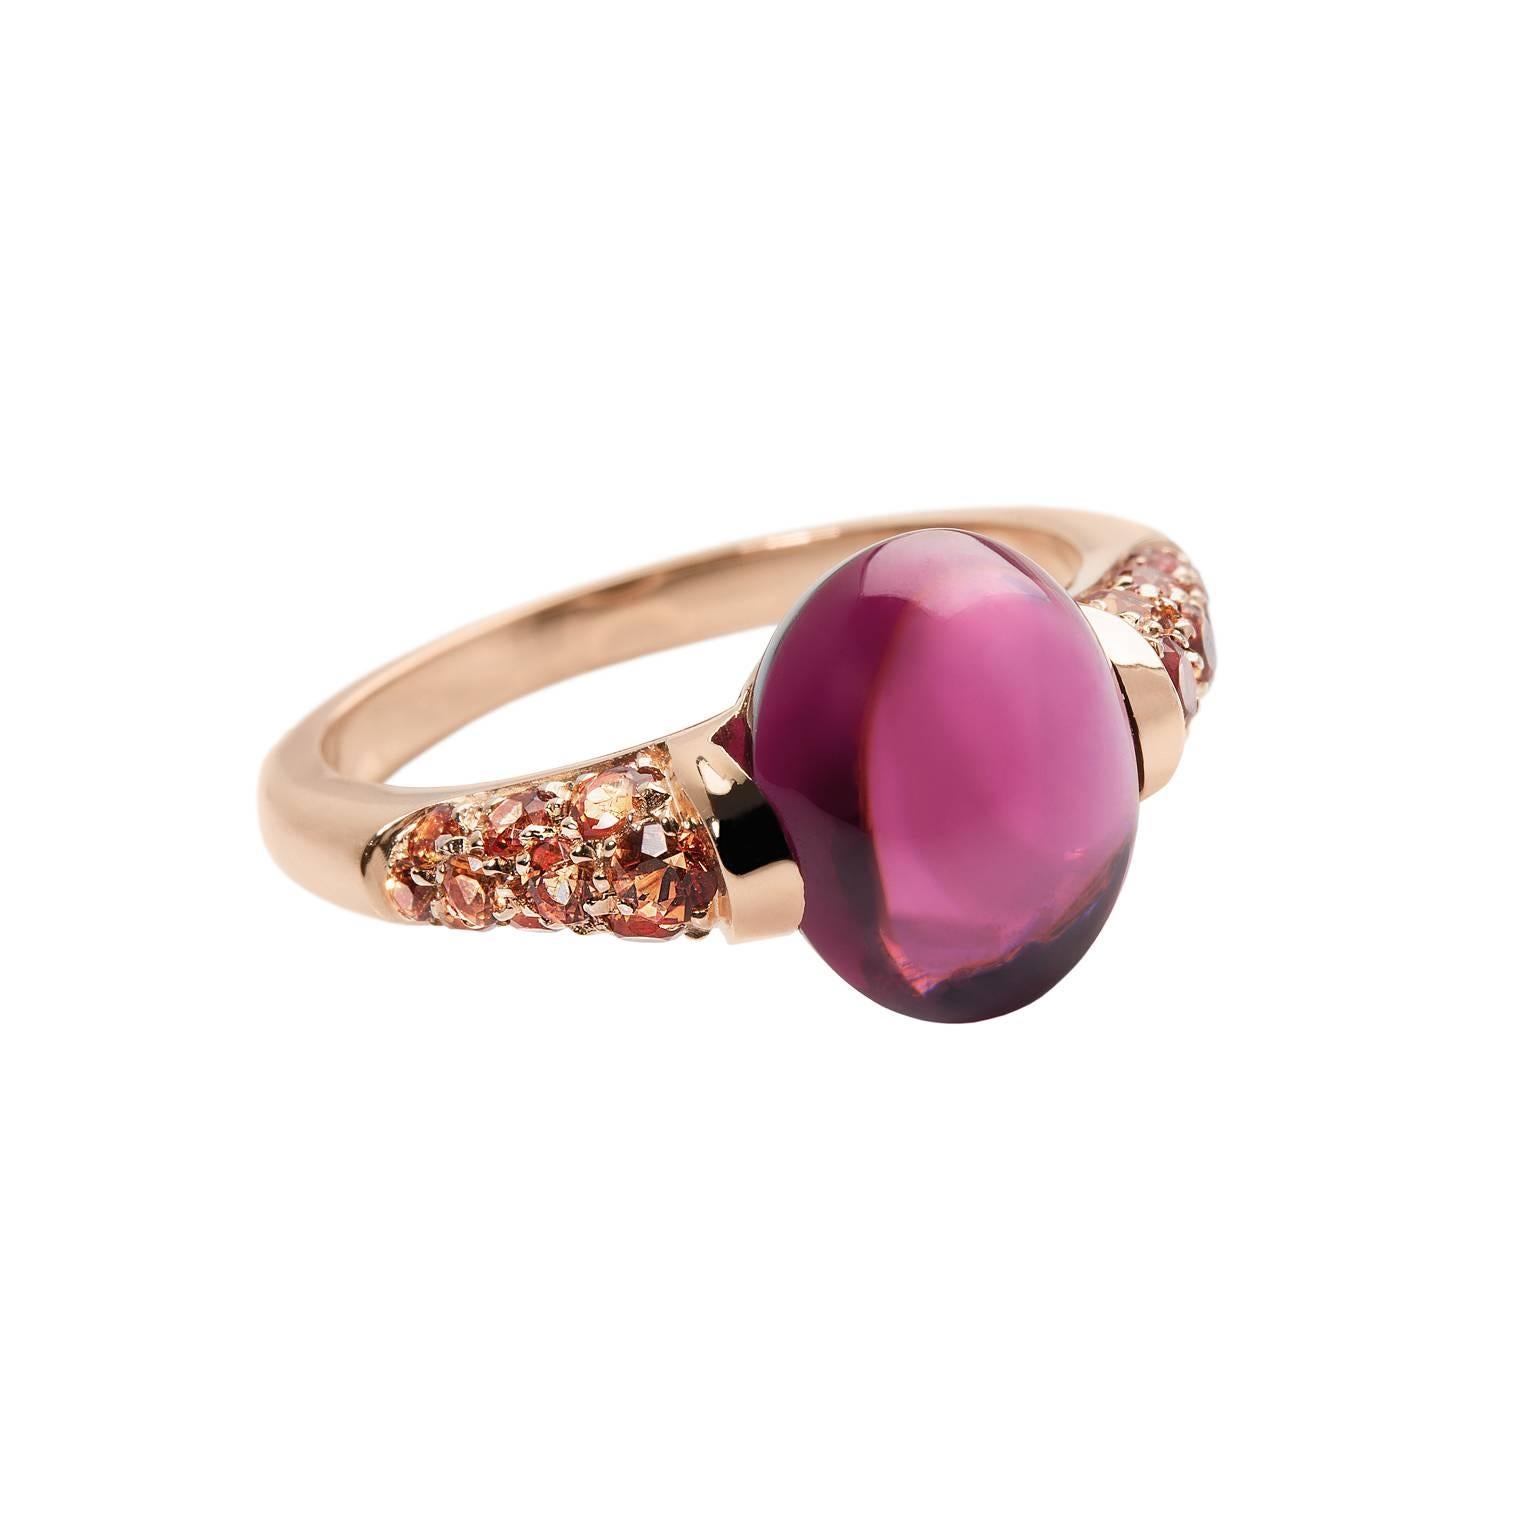 Cabochon Rhodolite Gemstone Orange Sapphire Red 18 Kt Gold Ring Made in Italy In New Condition For Sale In Bussolengo, Verona